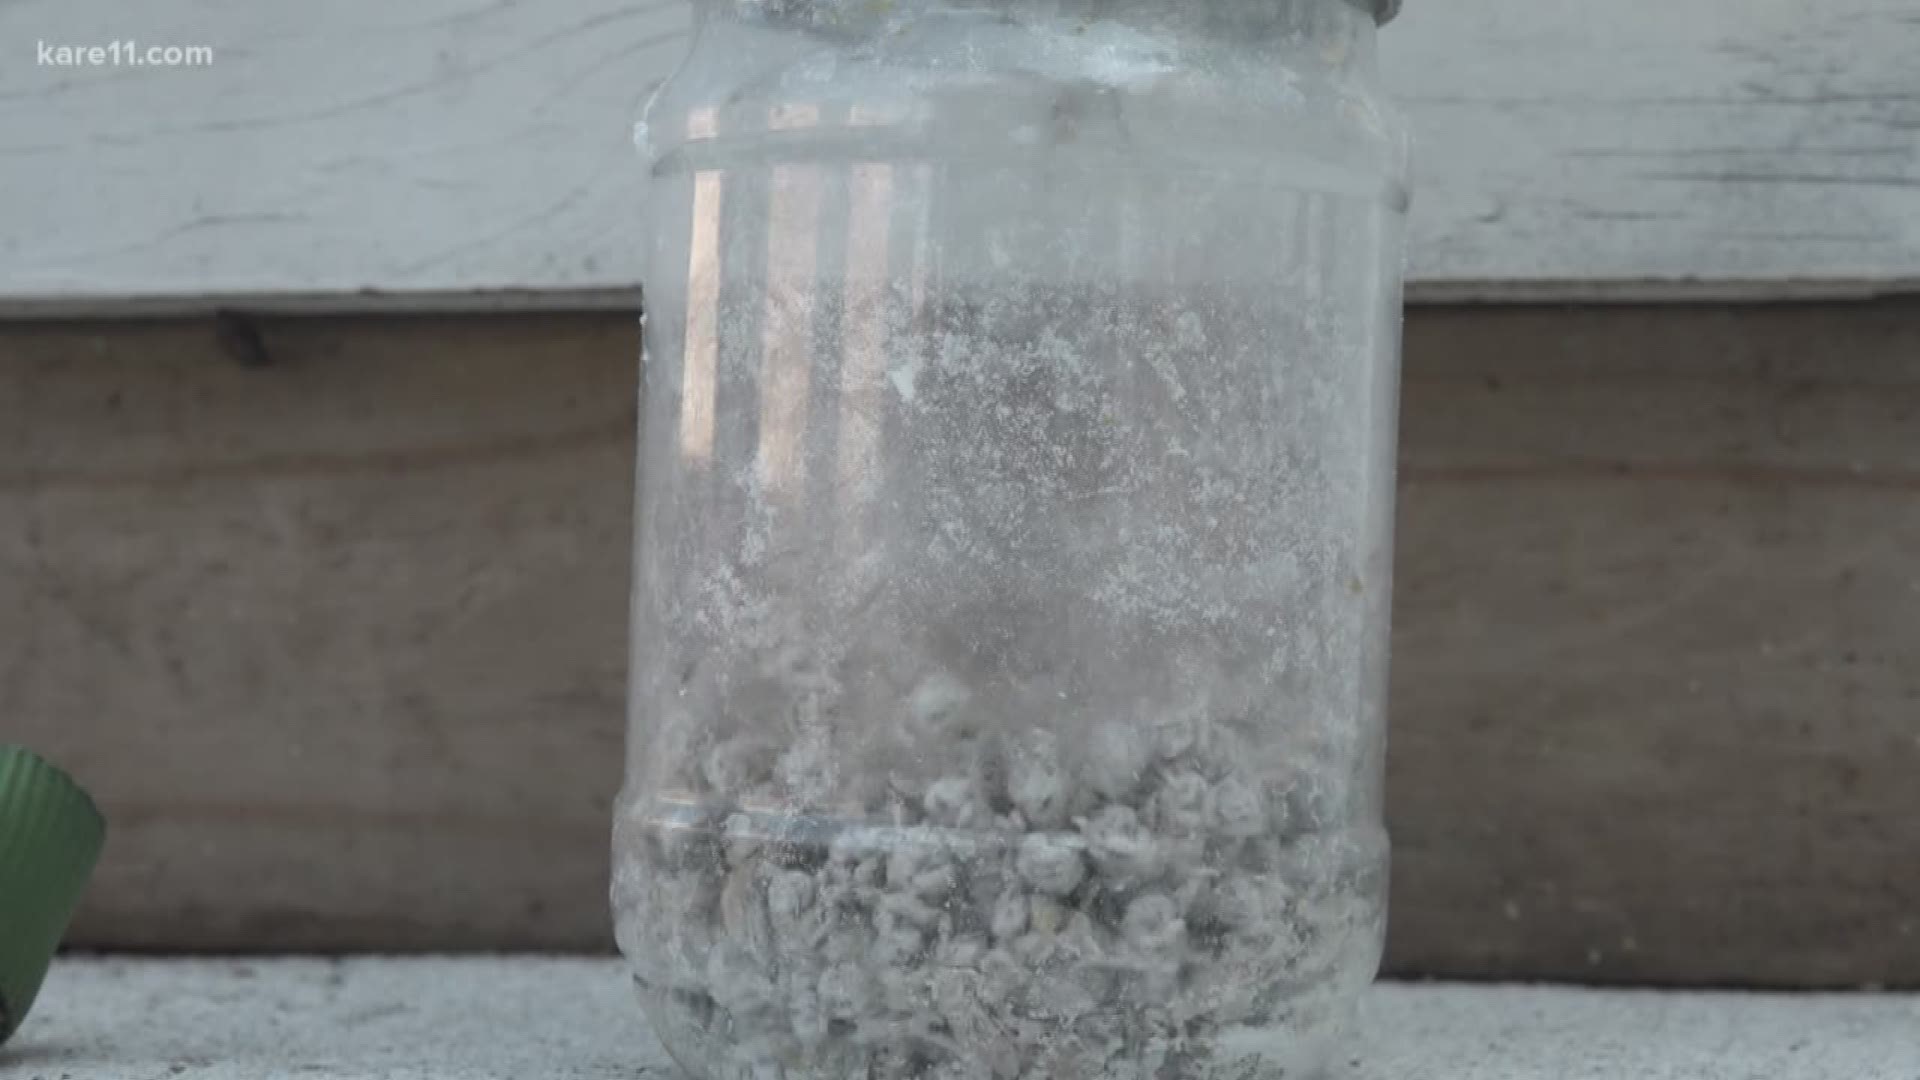 Researchers are looking deep in their rooftop hives for a parasite that can destroy a colony. The test involves gently scooping bees into a jar and coating them with powdered sugar, which causes the parasite to detach. https://kare11.tv/2QkXwLV